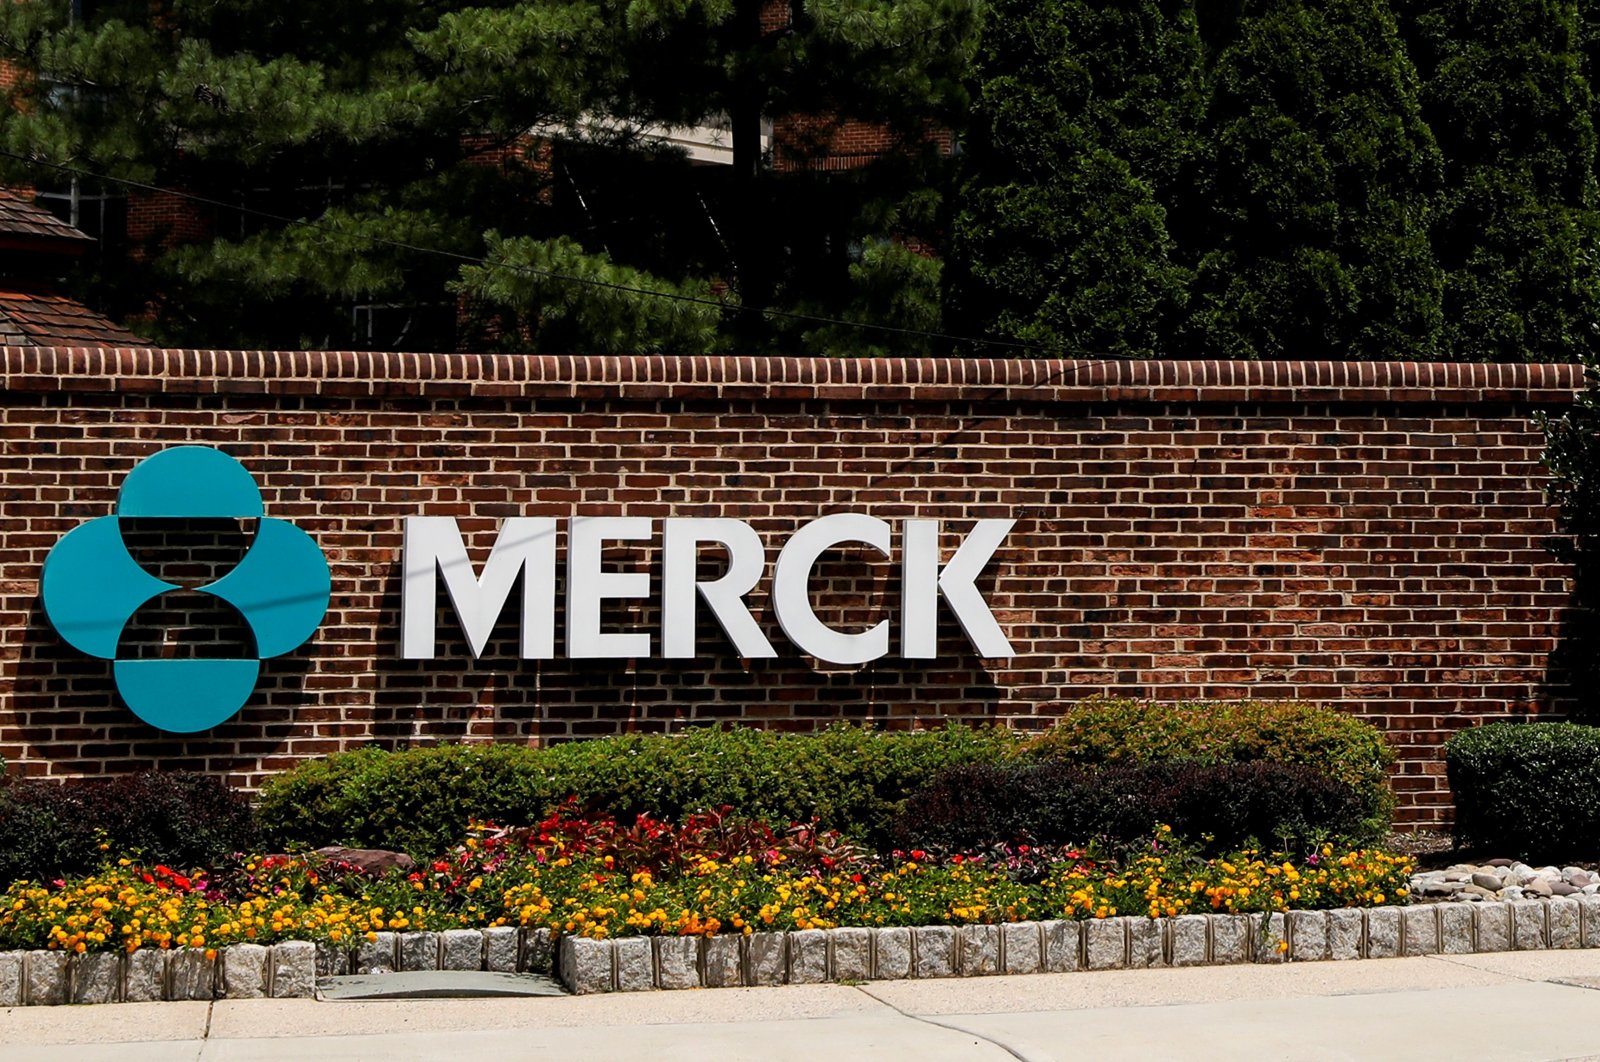 The Merck logo is seen at a gate to the Merck & Co campus in Linden, New Jersey, July 12, 2018. (Reuters Photo)